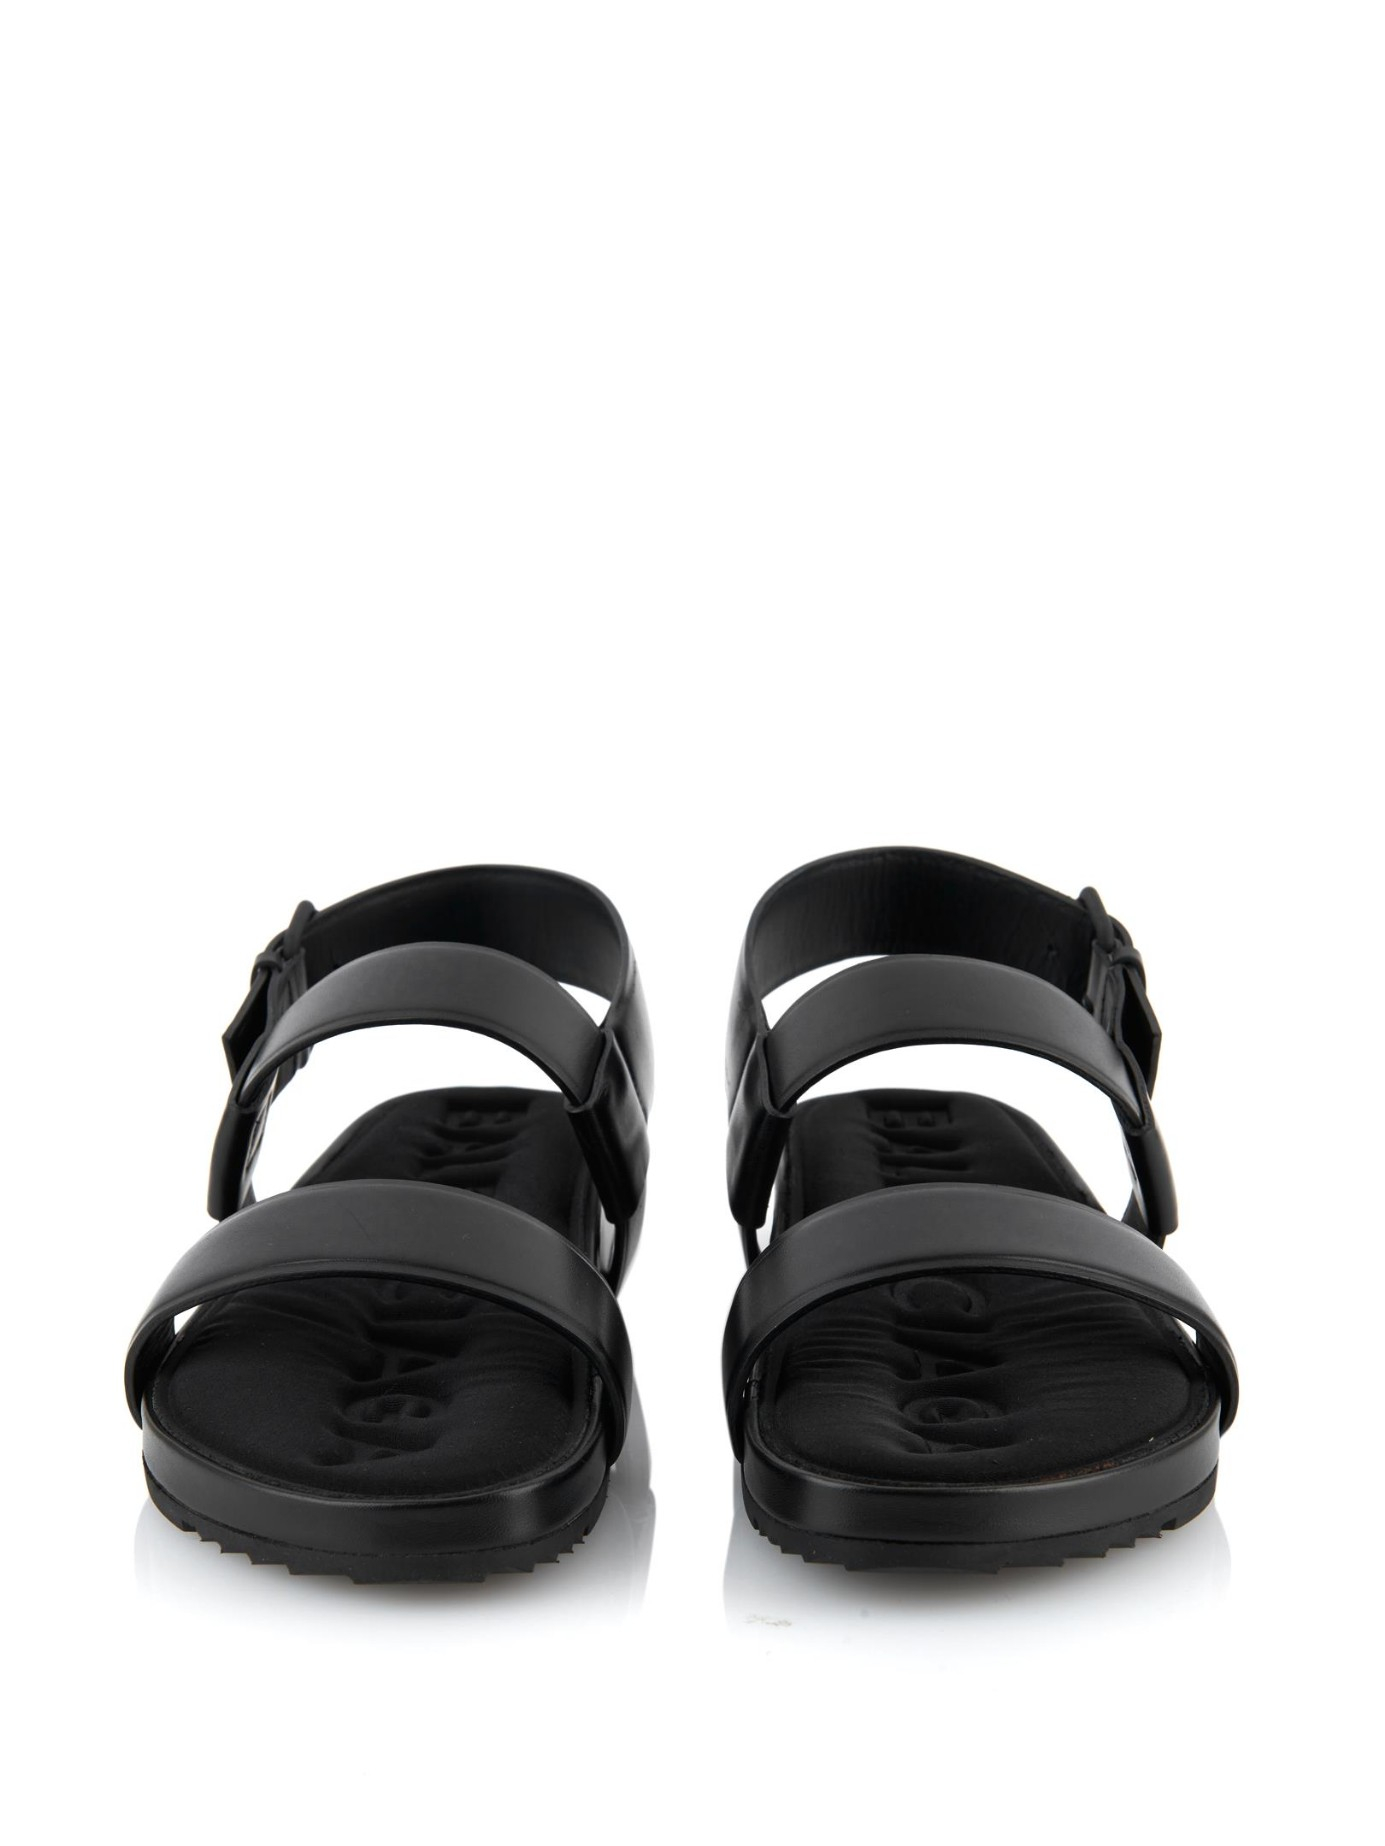 Lyst - Balenciaga Double-Strap Leather Sandals in Black